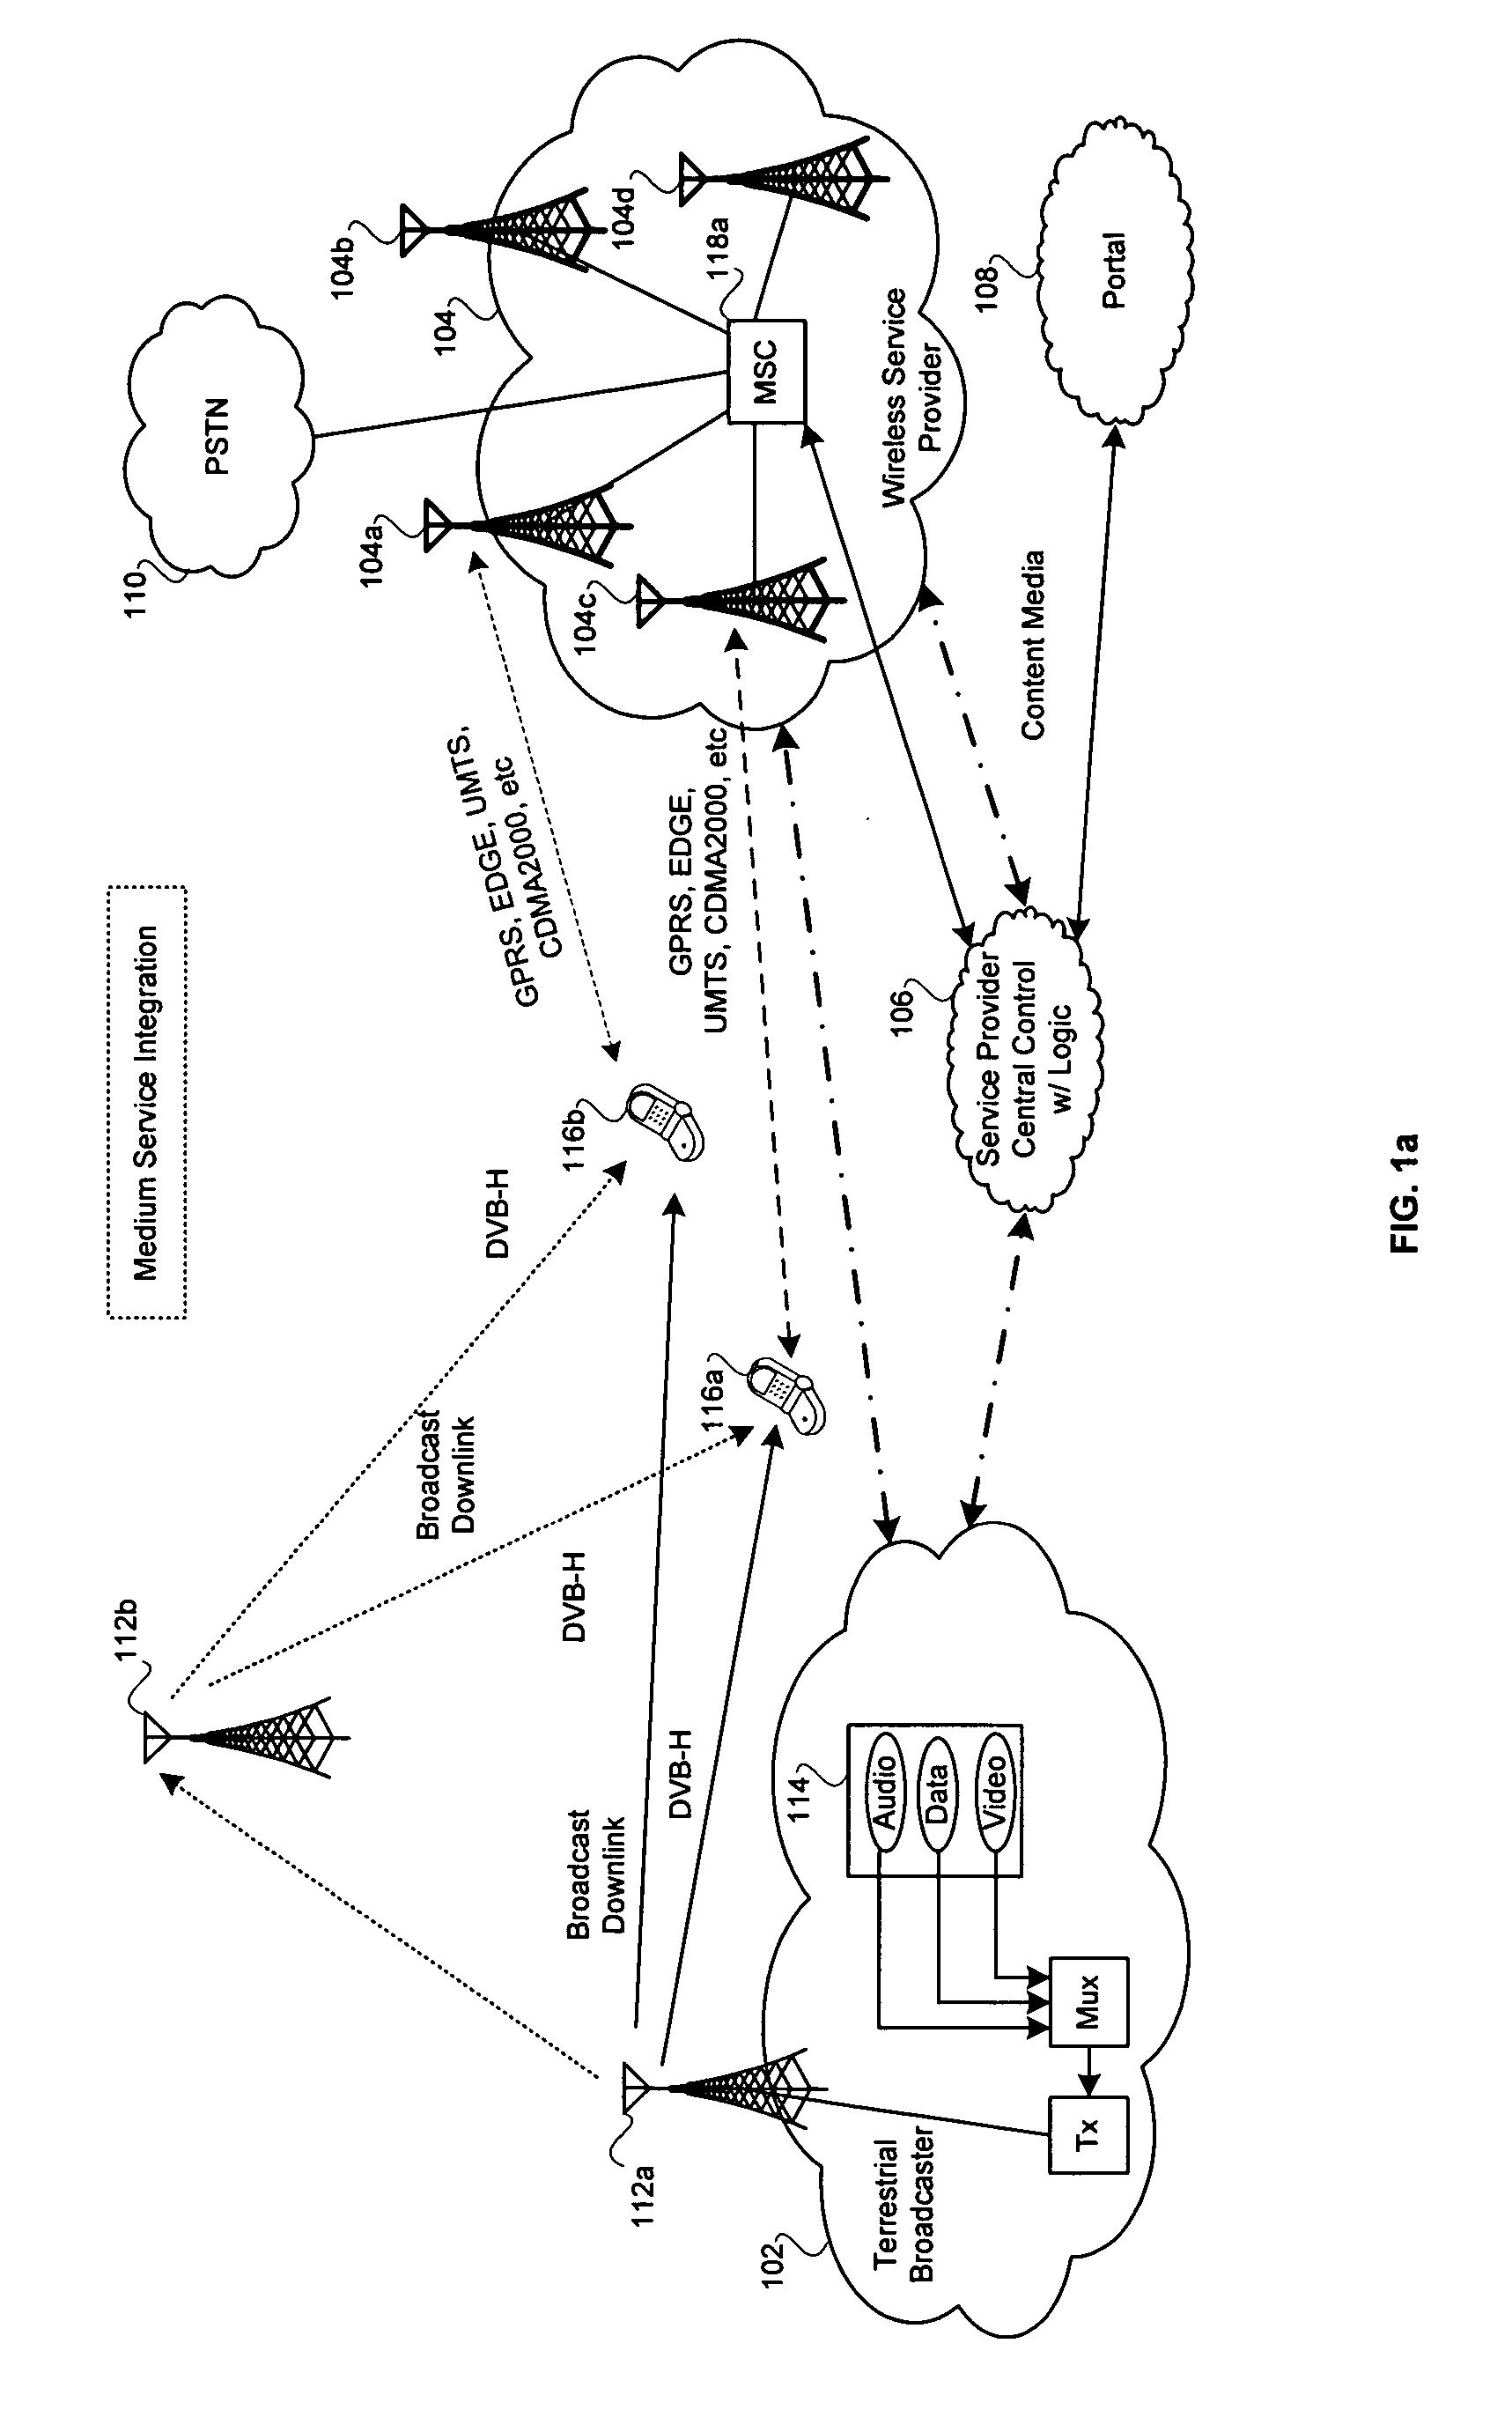 Method and system for a mobile architecture that supports a cellular or wireless network and broadcast utilizing an integrated single chip cellular and broadcast silicon solution